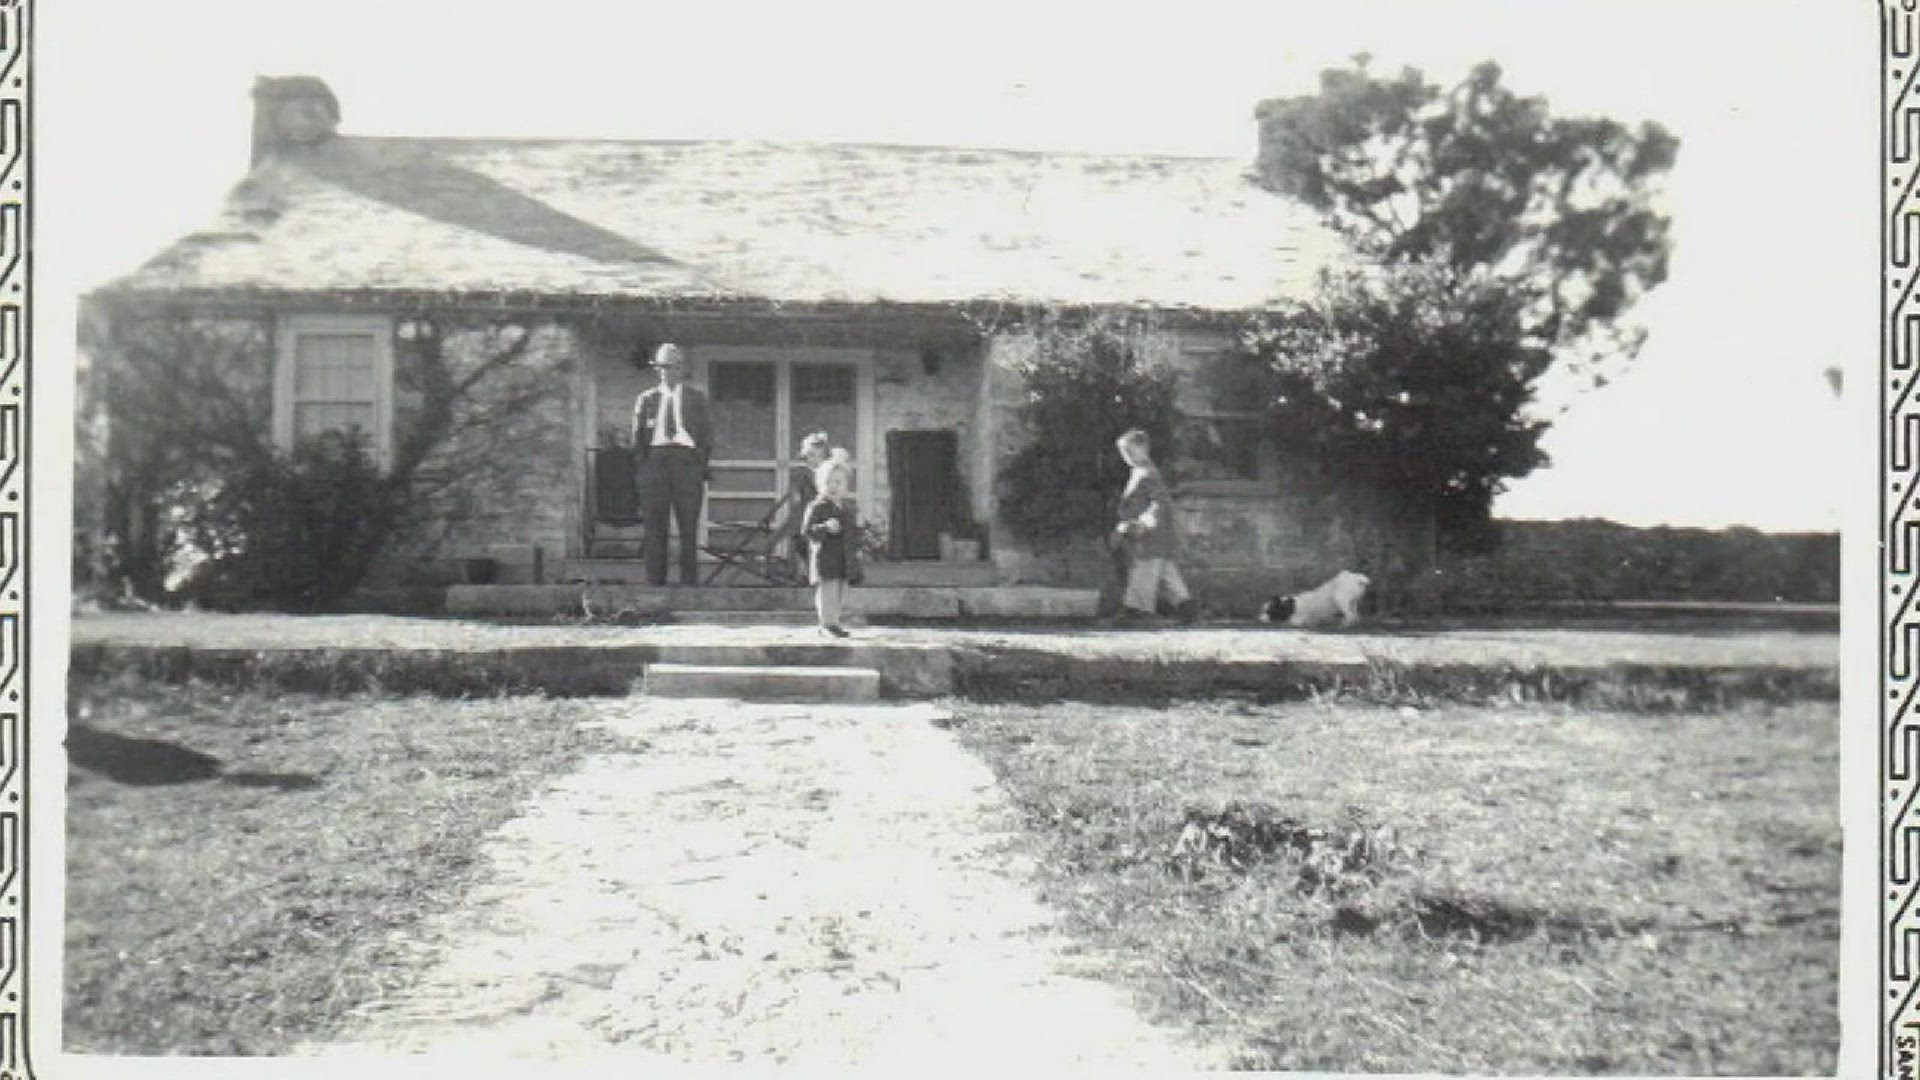 A piece of Round Rock history, more than 150 years old, was in jeopardy of being demolished. But now the city council has decided to relocate the historic Old Stagecoach Inn instead.